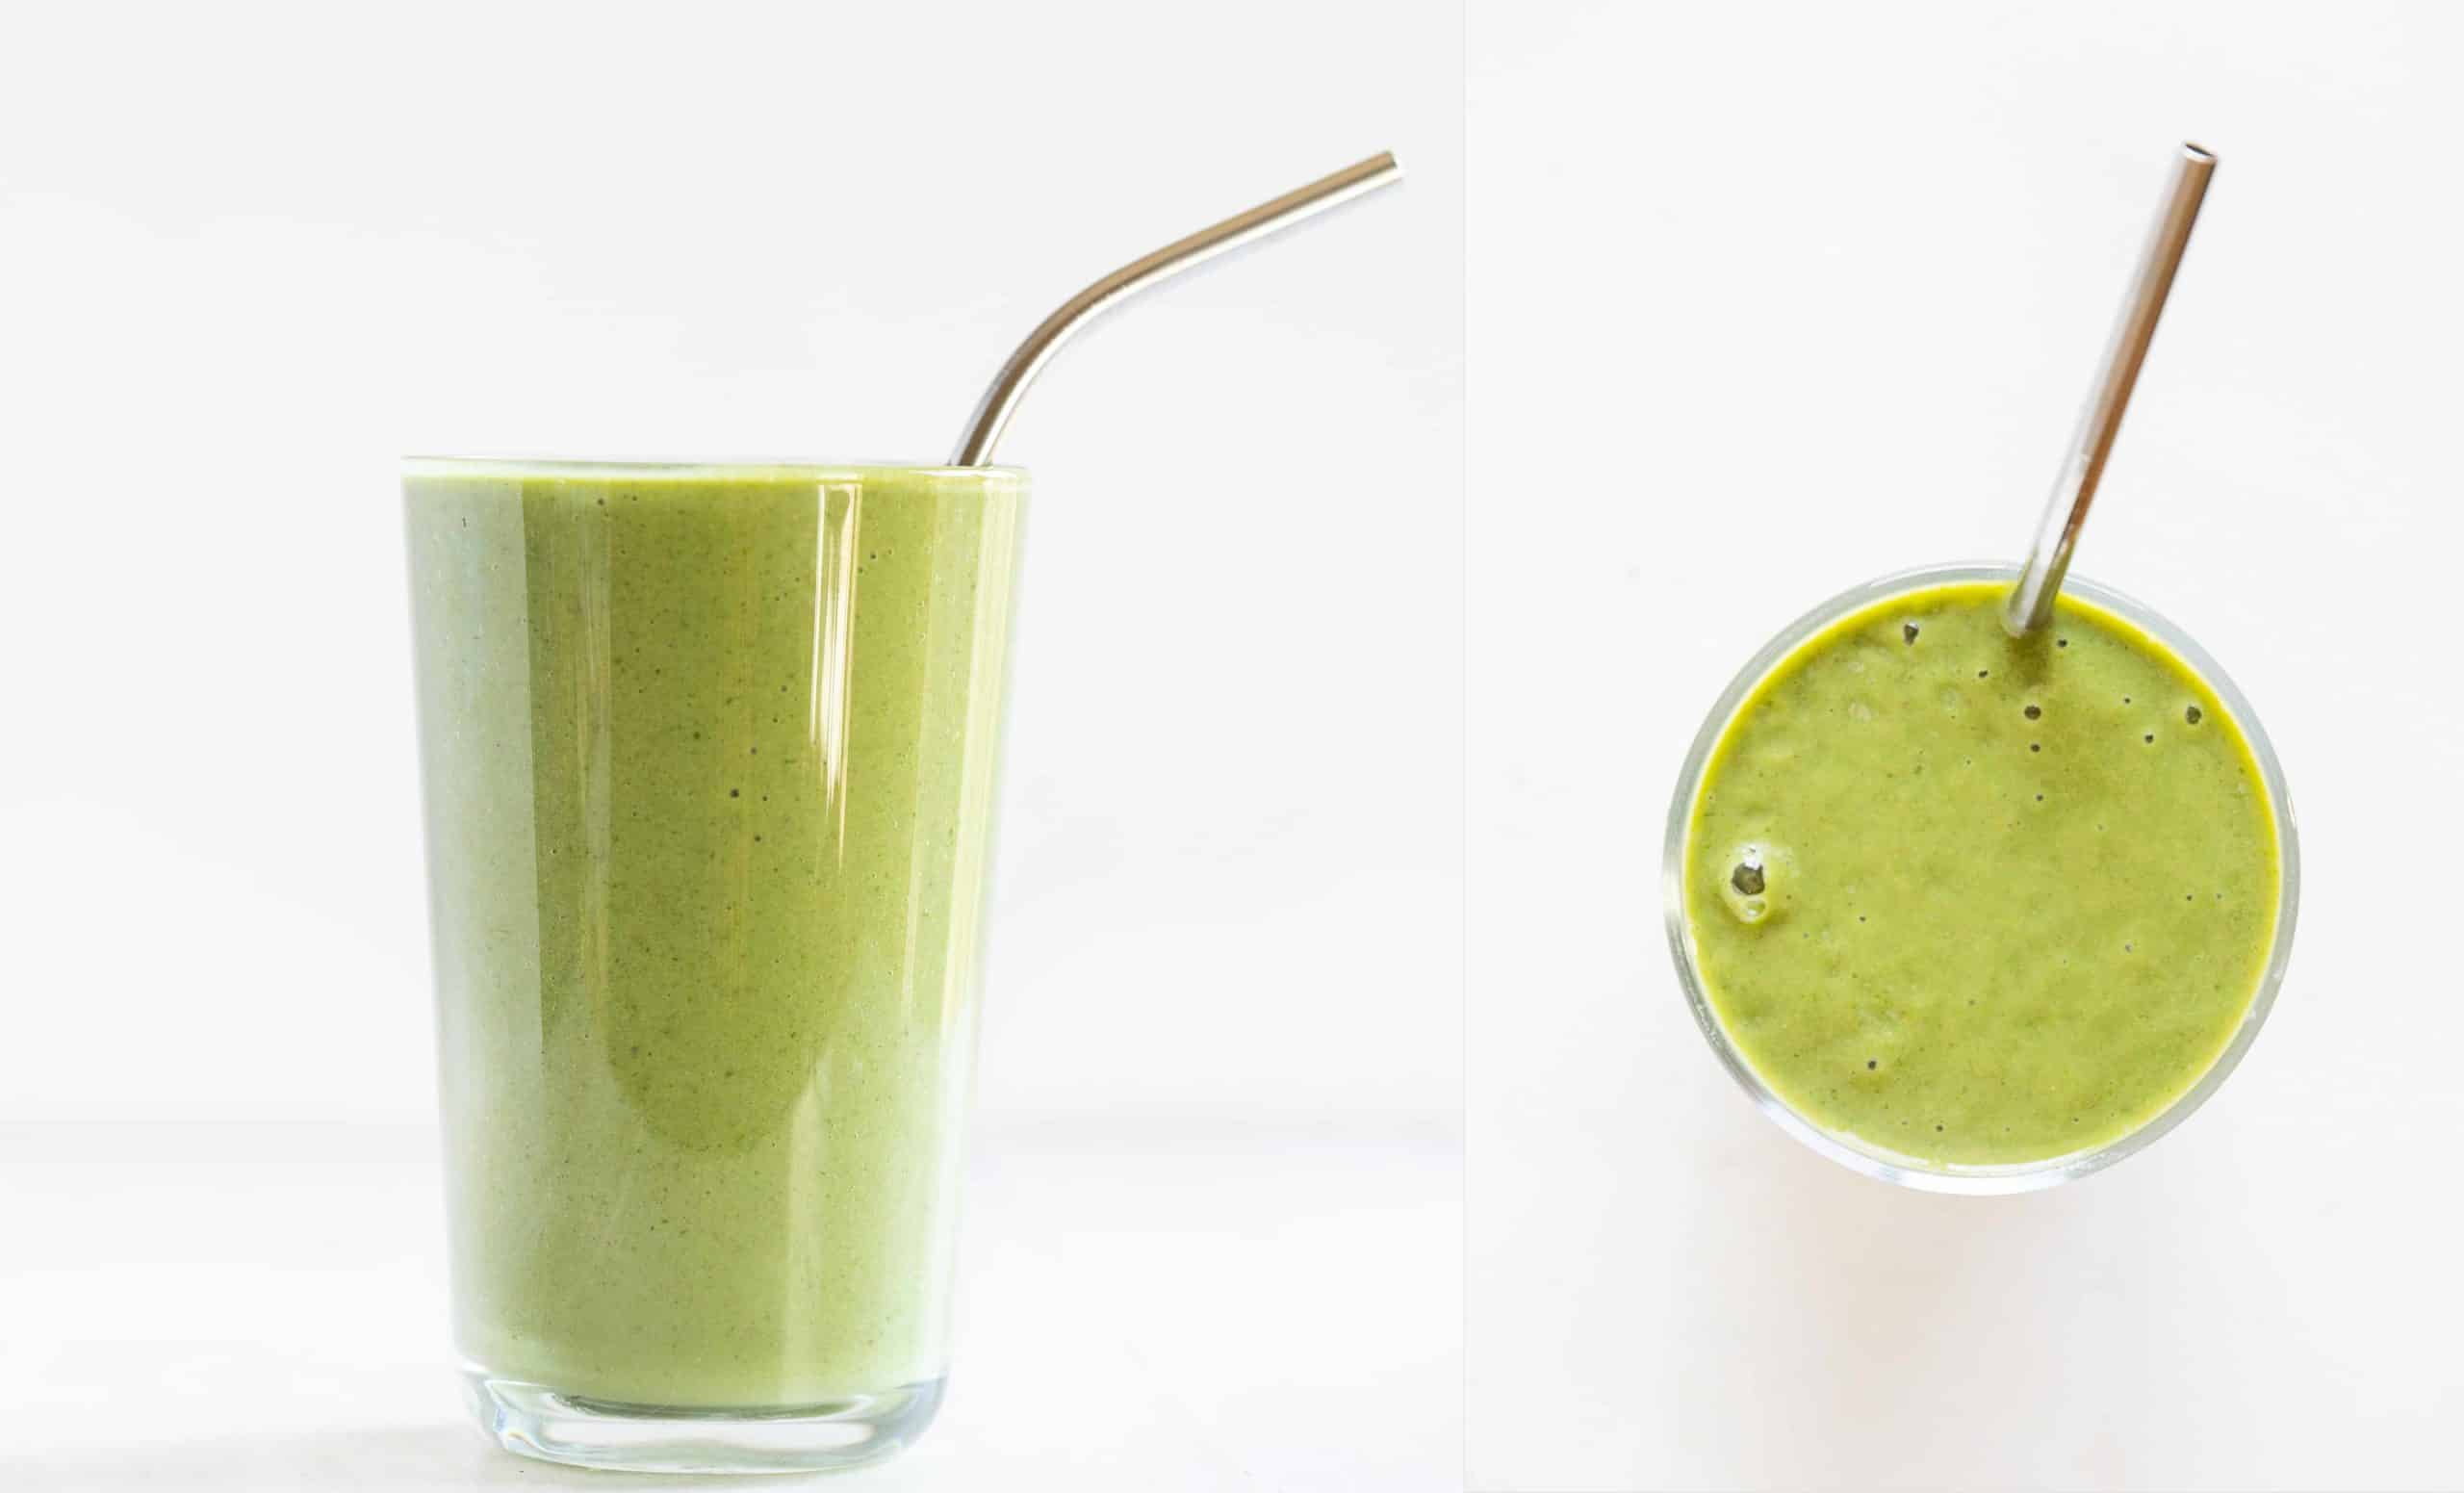 How to Make a Green Smoothie